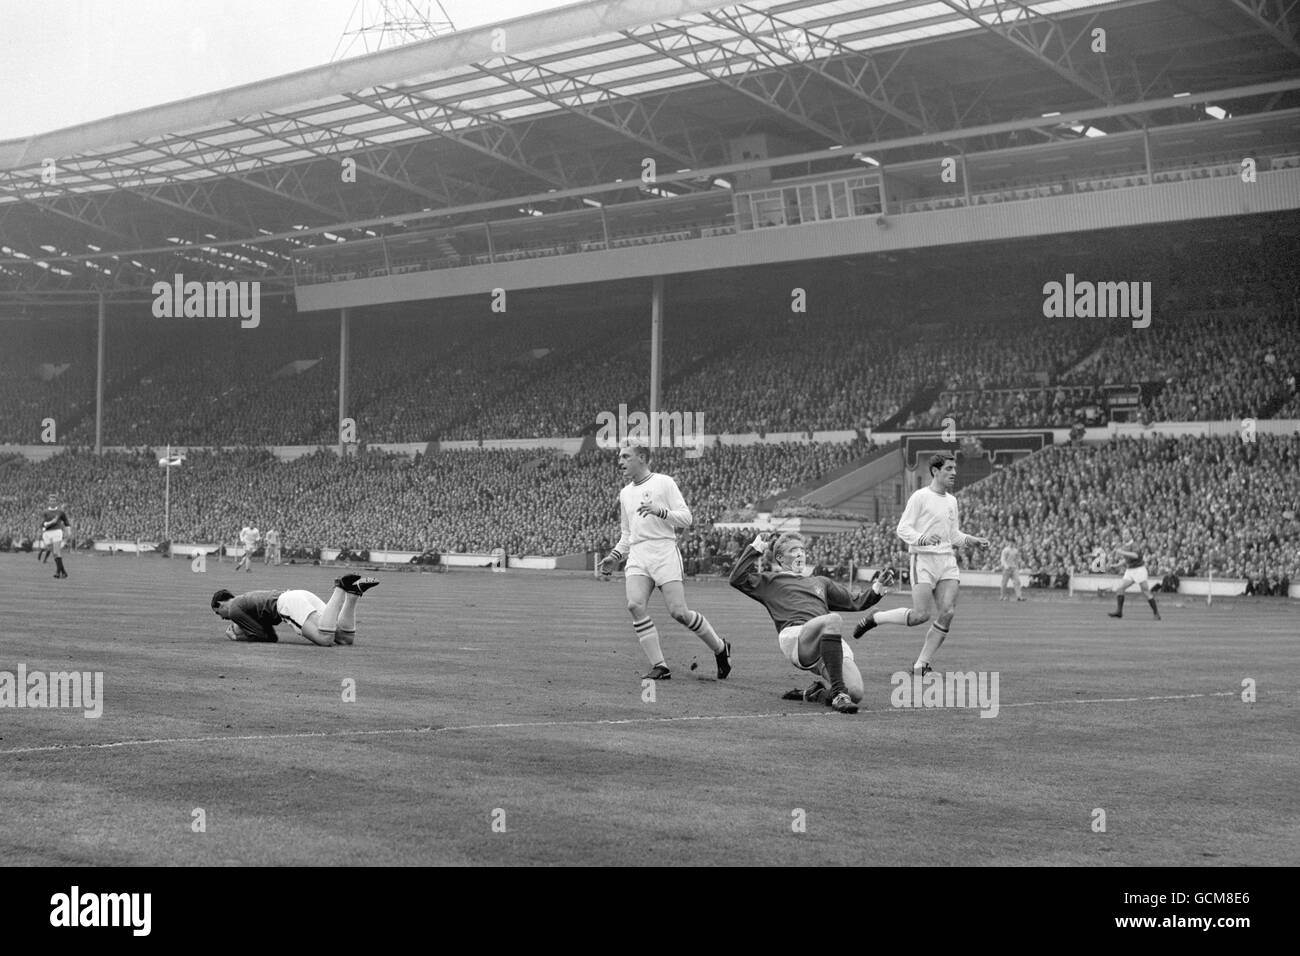 Manchester United's Denis Law, second right, slides on one knee as Leicester City goalkeeper Gordon Banks pounces on the ball. Leicester City defenders are Richie Norman, second left, and Frank McLintock, right. Stock Photo